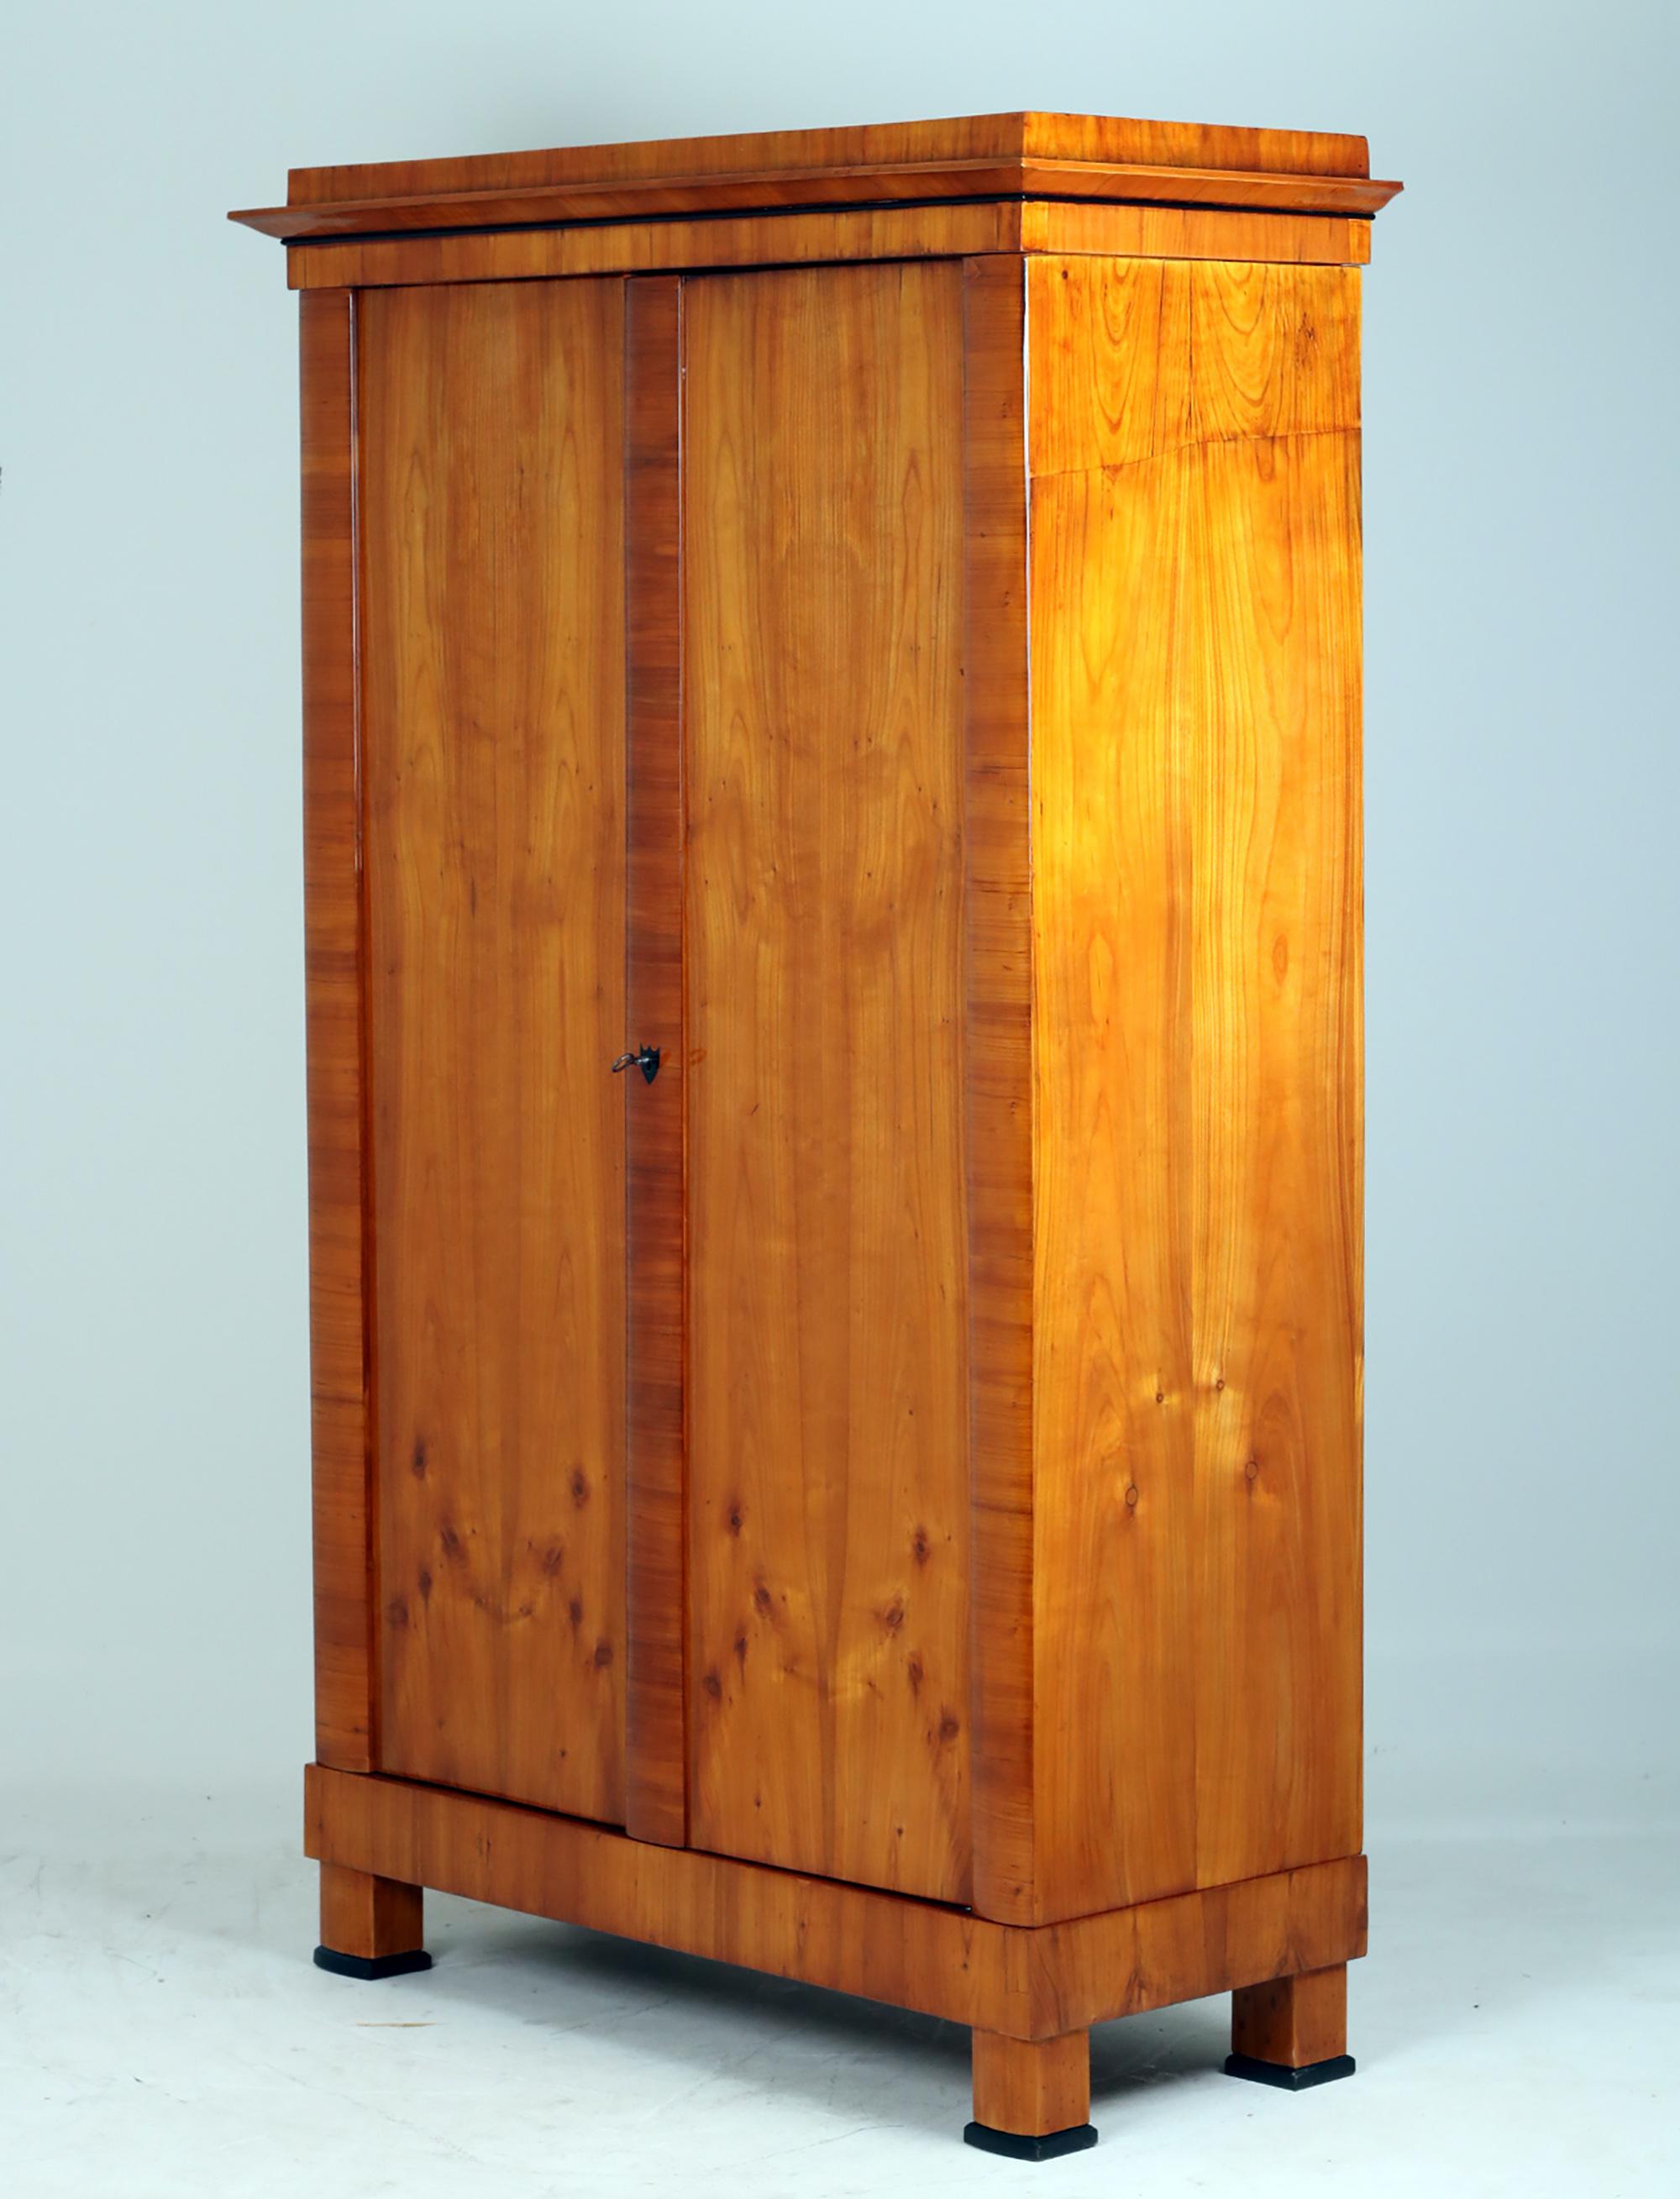 Biedermeier Cabinet, Austria 1830

Original two-door Biederemeier cupboard veneered in cherry.
Classic legs and an original lock.
The strike bar and the pilaster strips are cross-veneered and curved to the front. The escutcheon in the shape of a